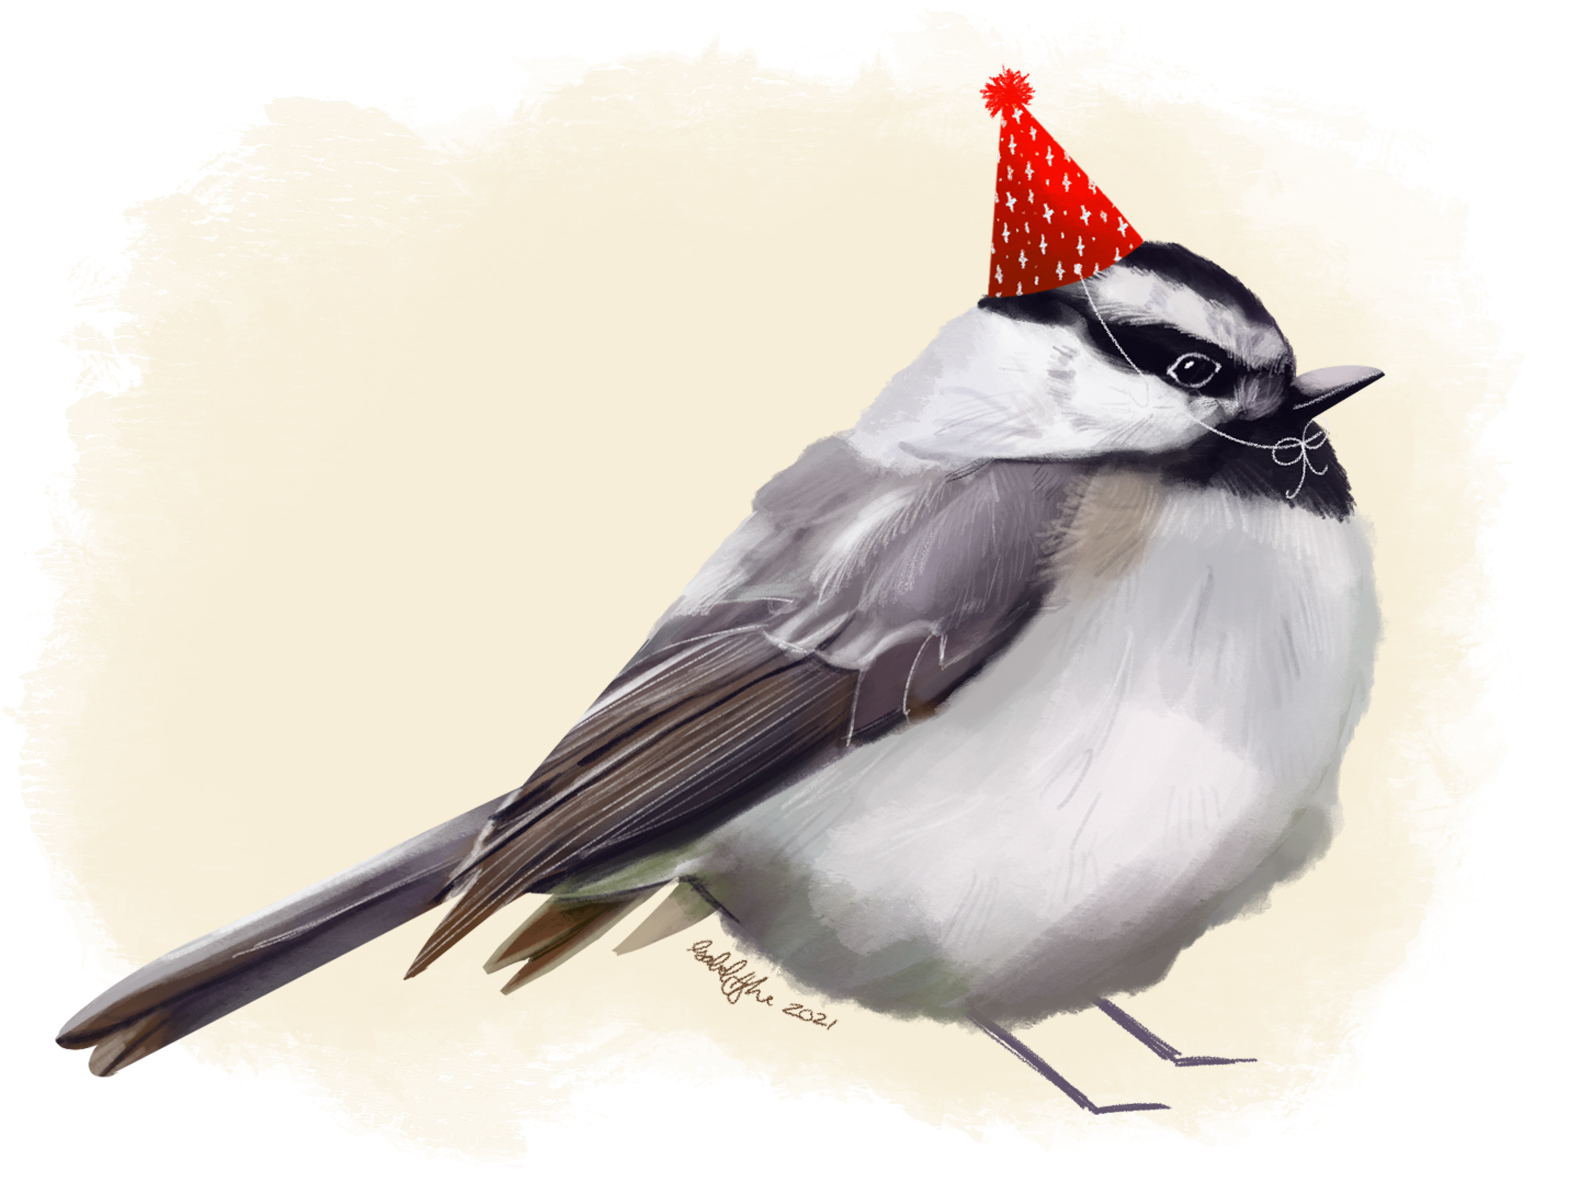 Gouache style digital illustration of a mountain chickadee wearing a red party hat